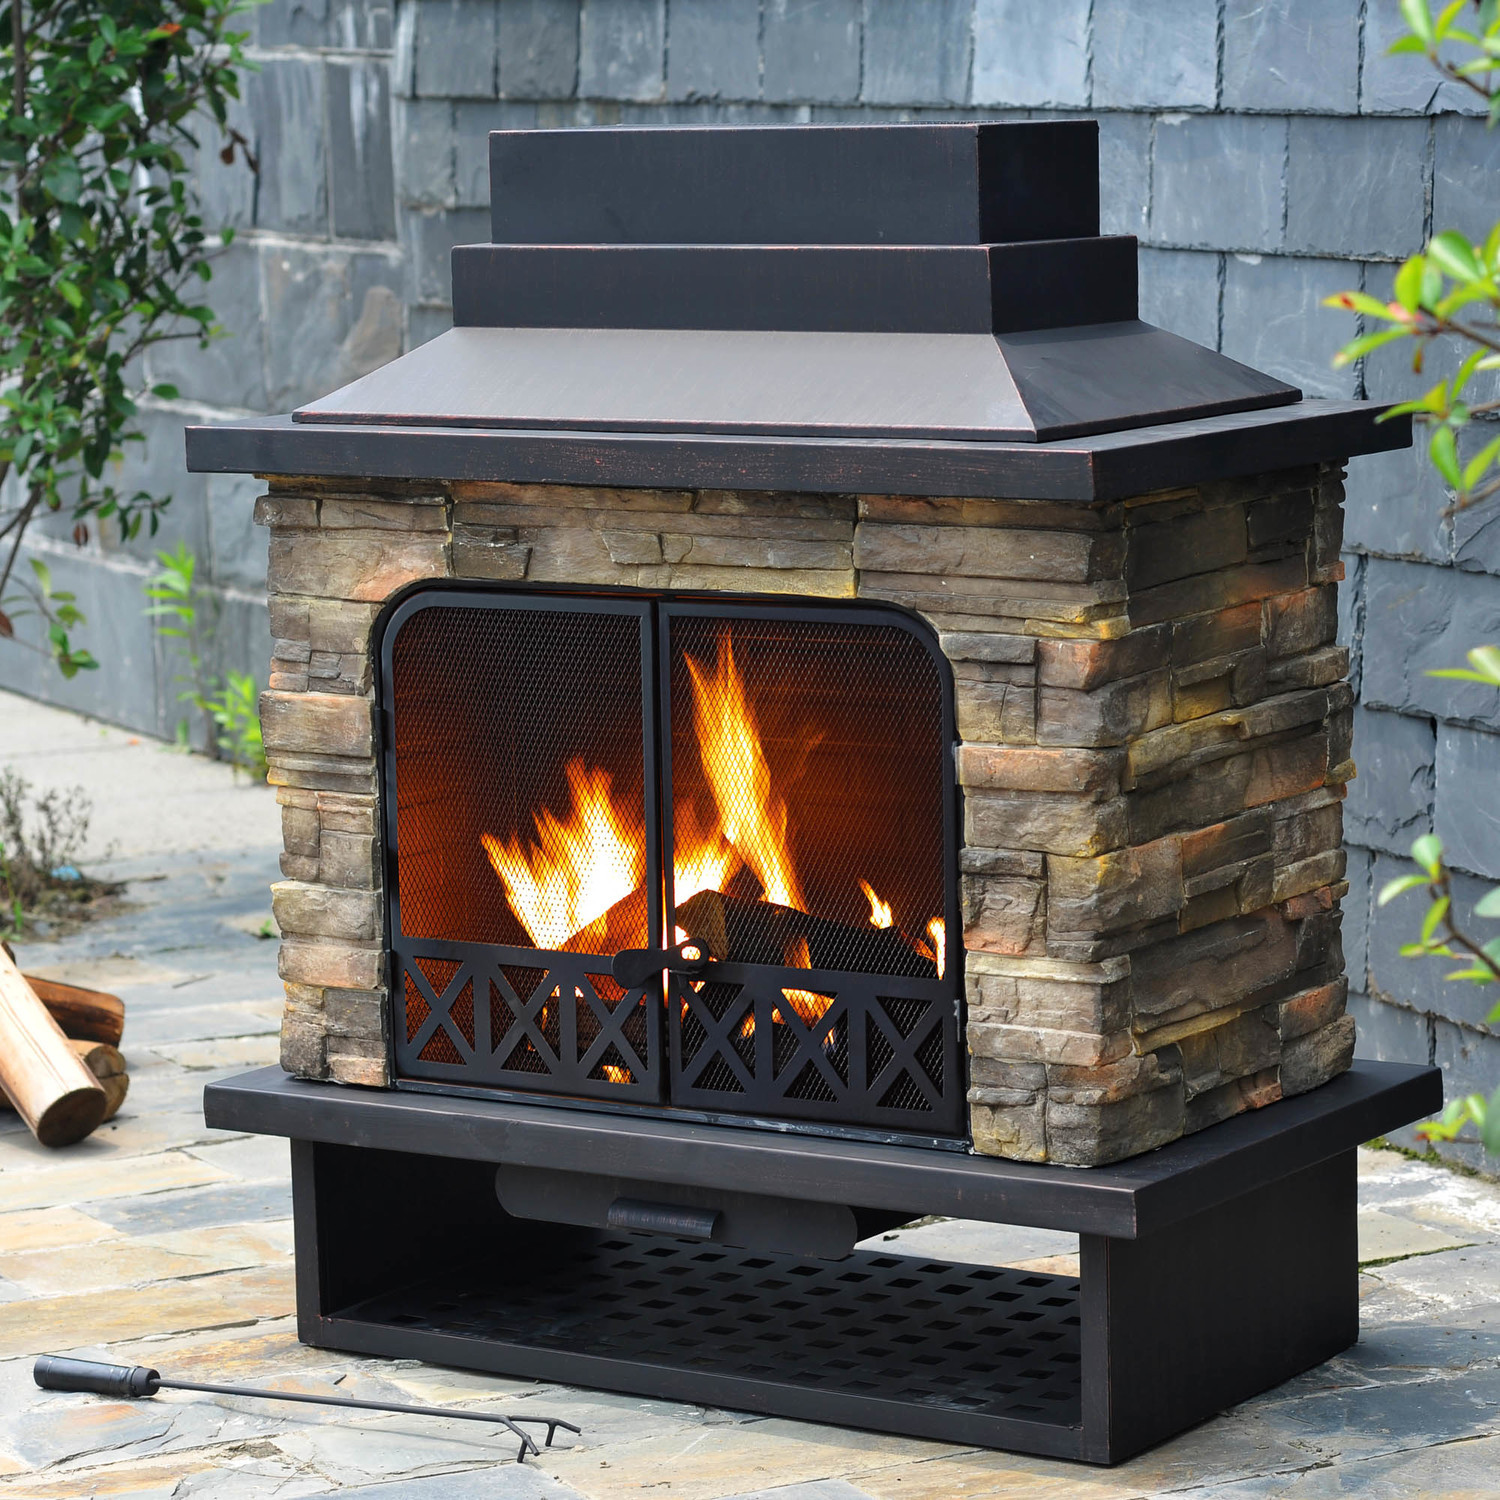 DIY Wood Burning Fireplace
 Fireplace DIY Prefab Outdoor Fireplace For Your Outdoor